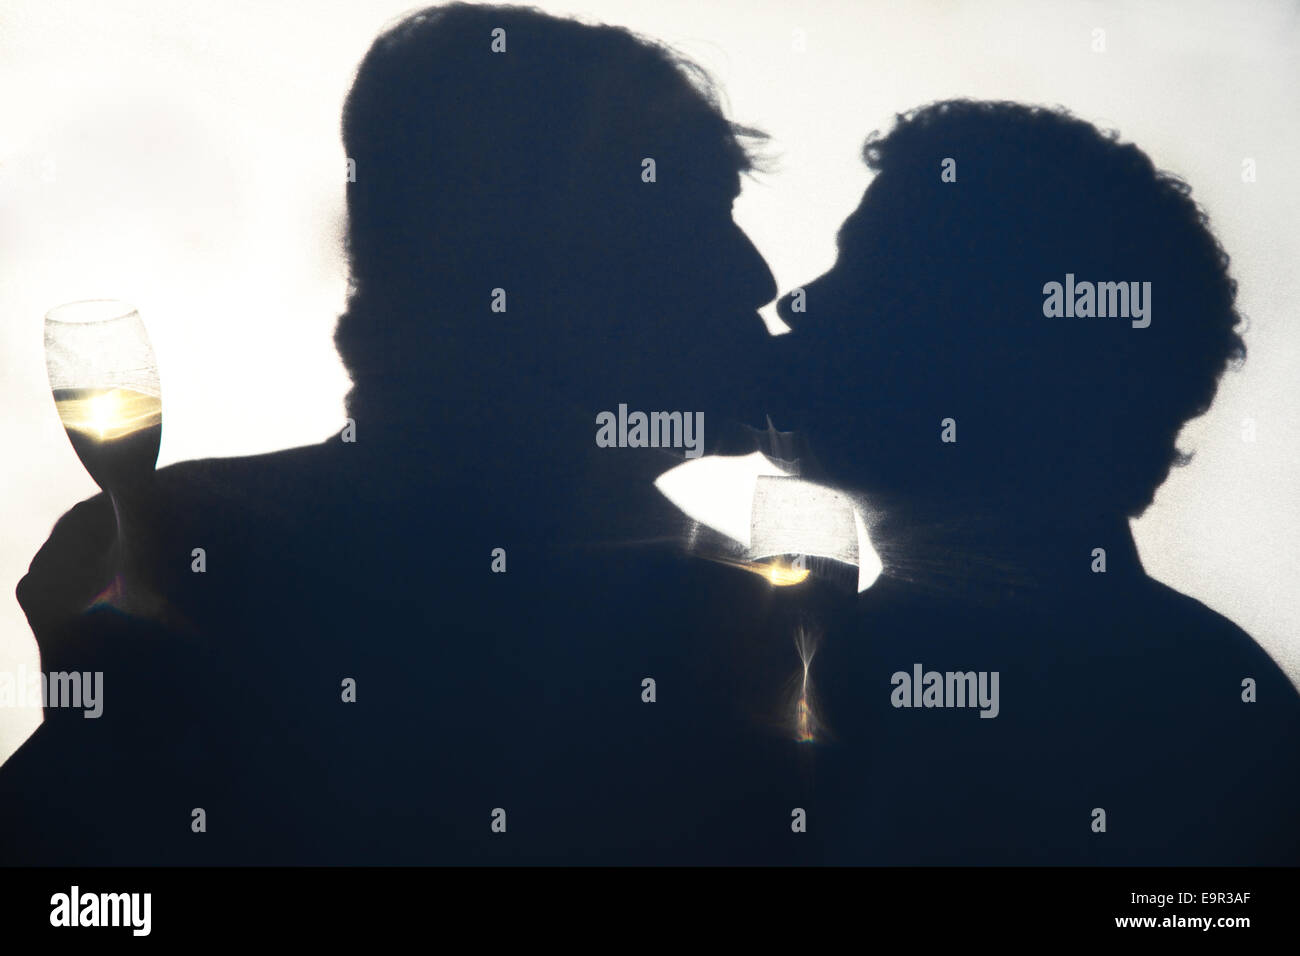 Silhouette of gay men kissing on their wedding day, holding champagne glasses behind an opaque screen. Stock Photo